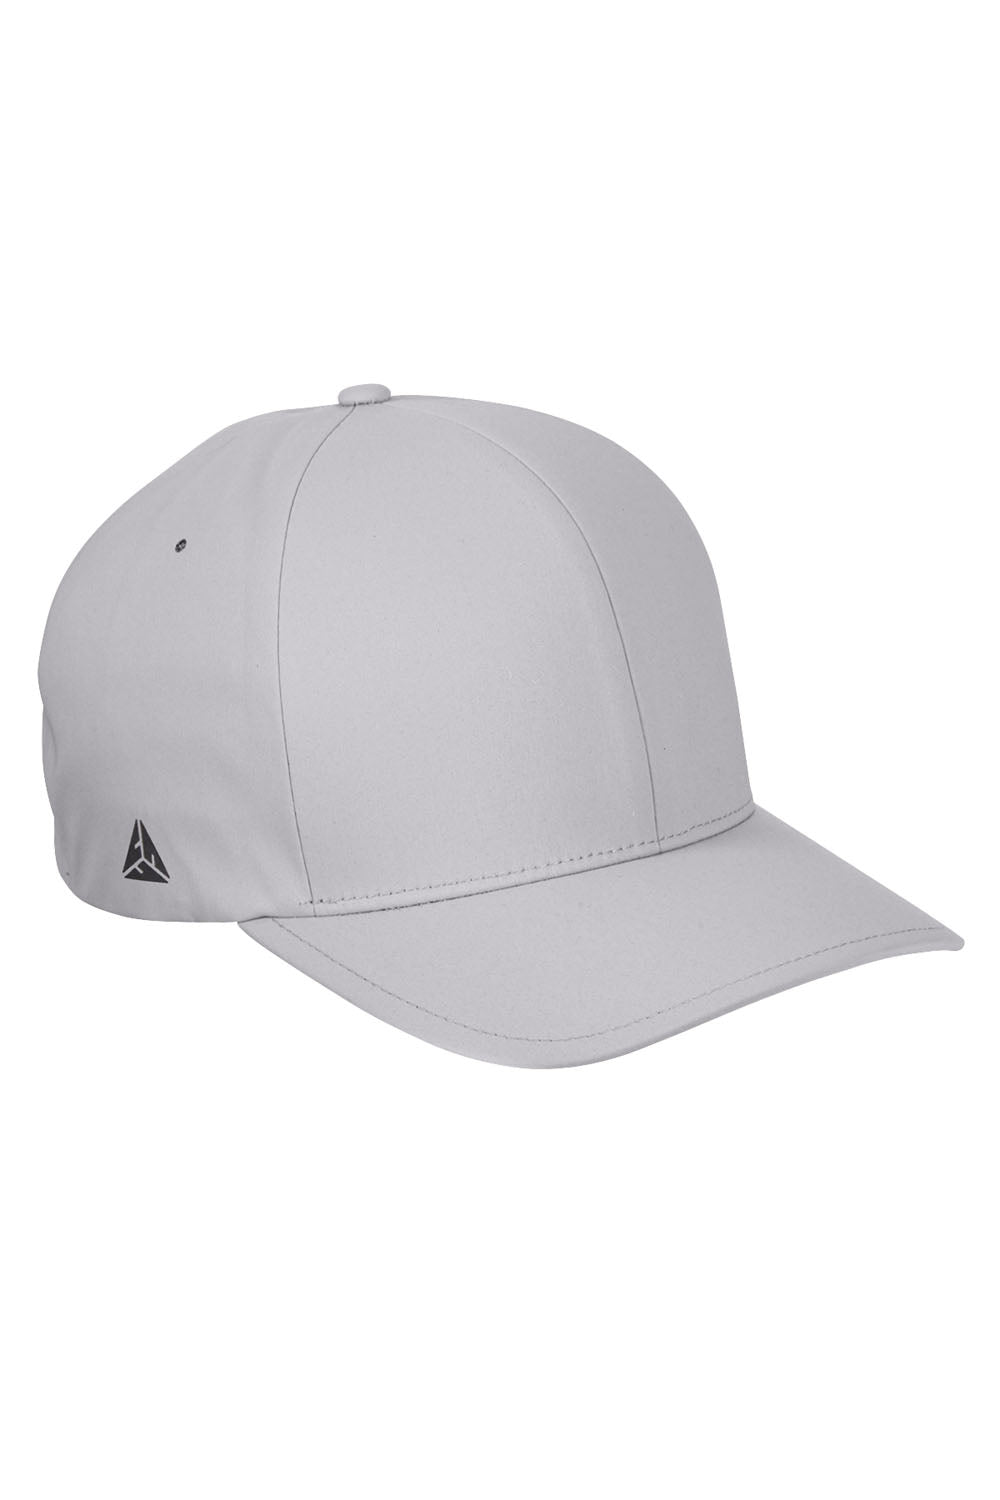 Flexfit YP180 Mens Moisture Wicking Stretch Fit Hat Silver Grey Front